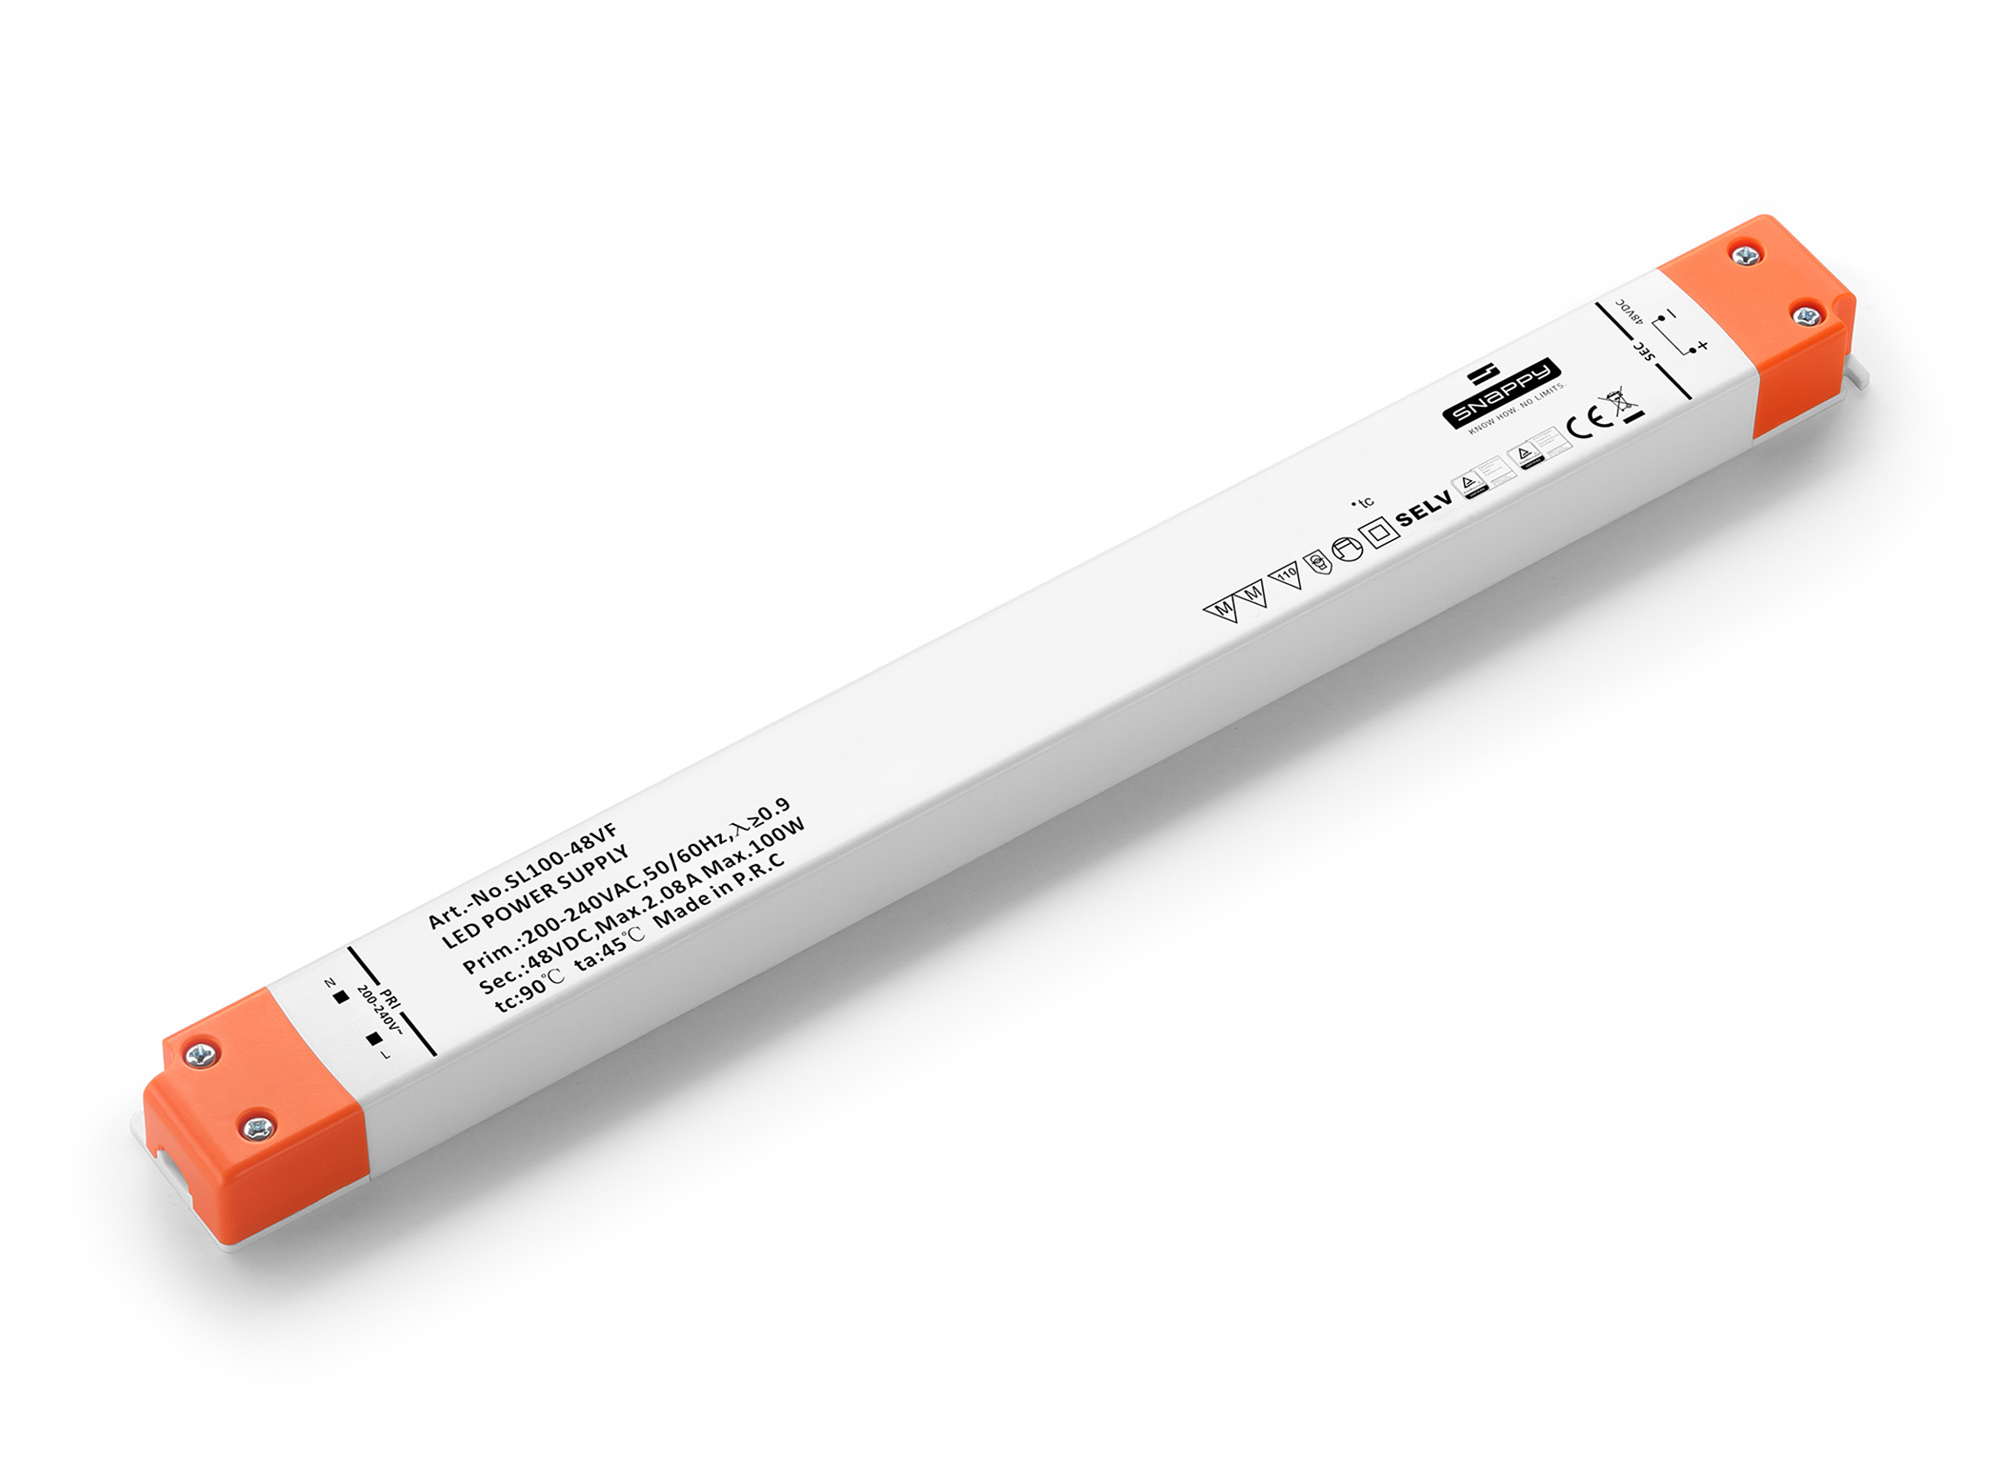 SL100-48VF  100W, Constant Voltage Non Dimmable LED Driver, 48VDC, 2.08A, Input 200-240VAC 50/60Hz, IP20.